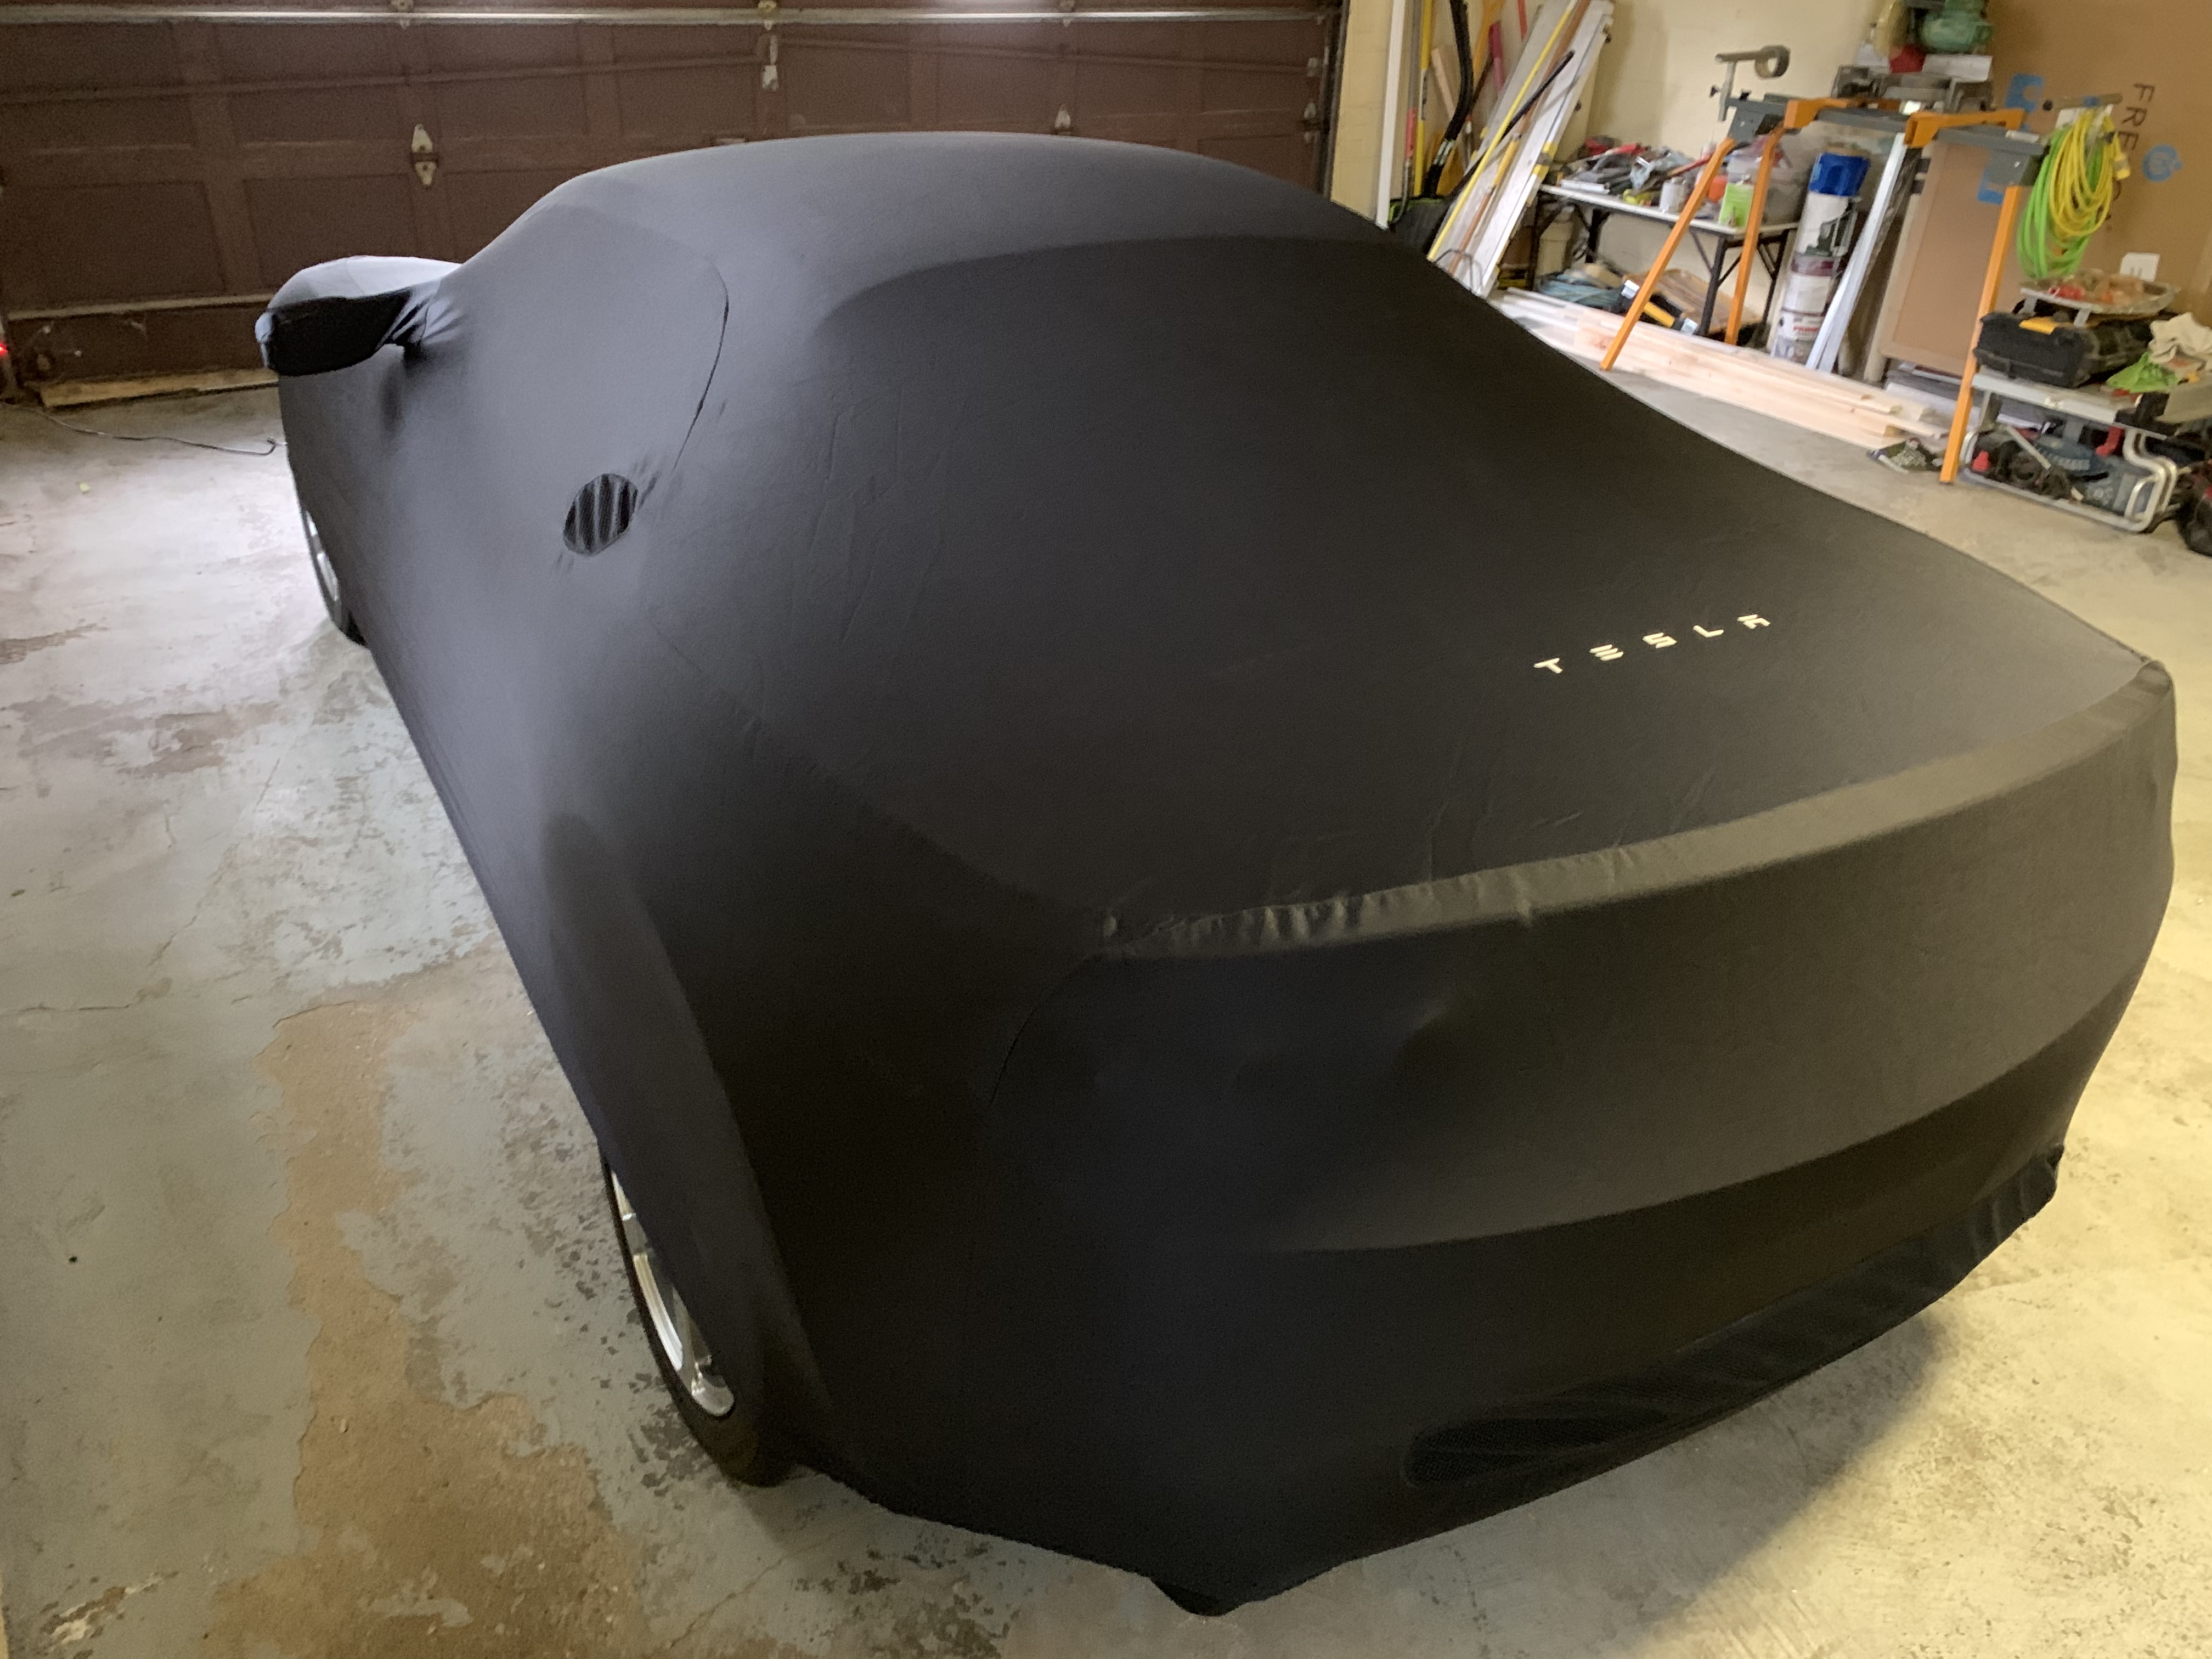 Tesla Model S BlackMaxx Precision Tailored Fit Car Cover, Indoor